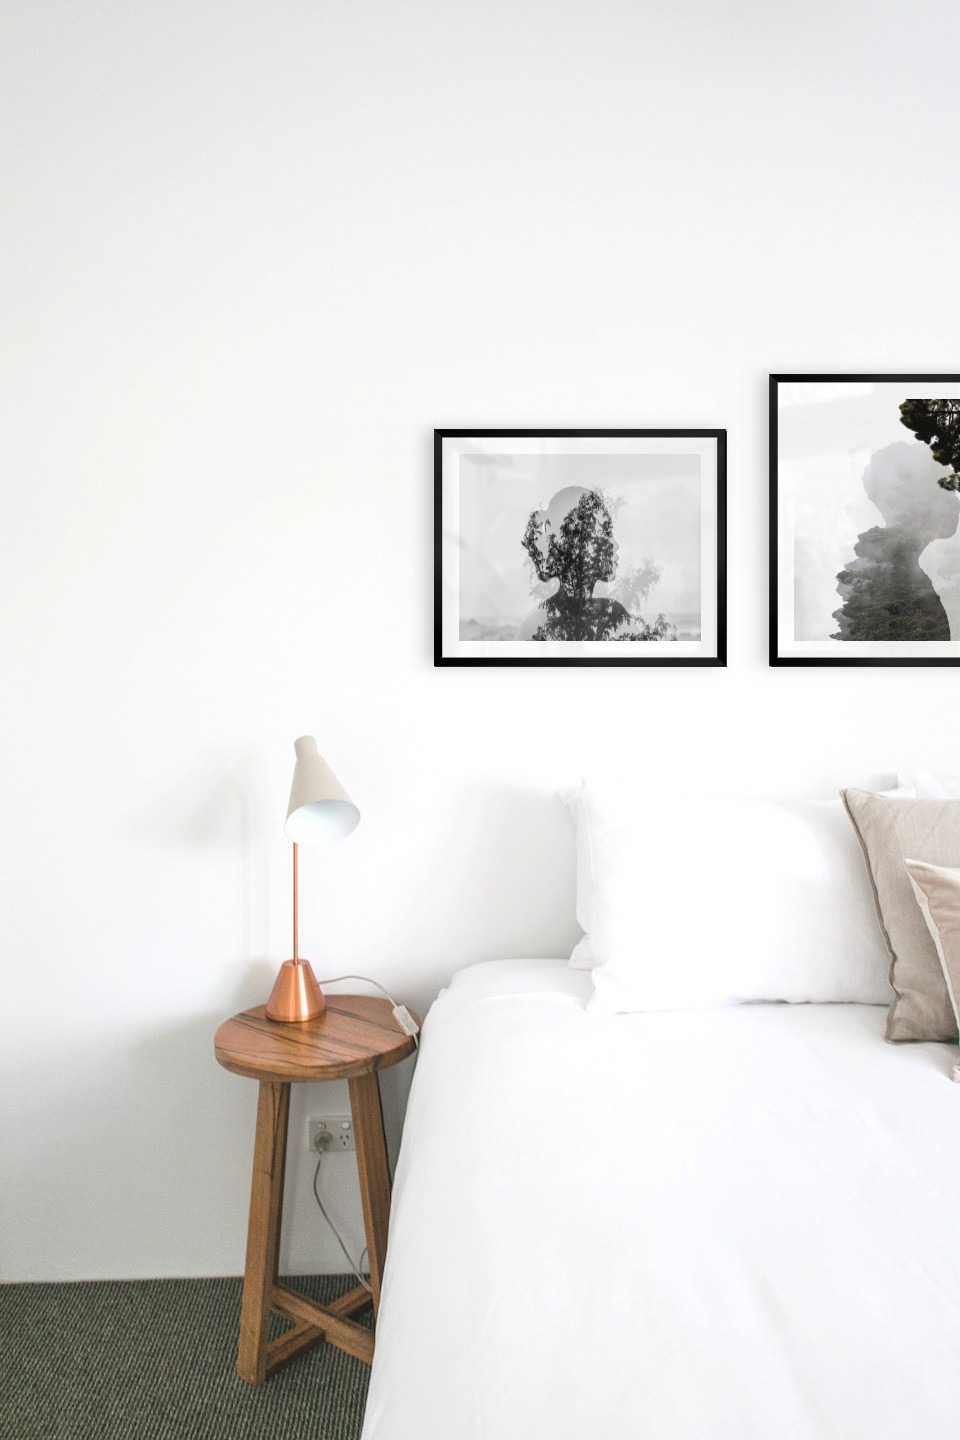 Gallery wall with picture frames in black in sizes 40x50 with prints "Trees and silhouette" and "Silhouette and tree"